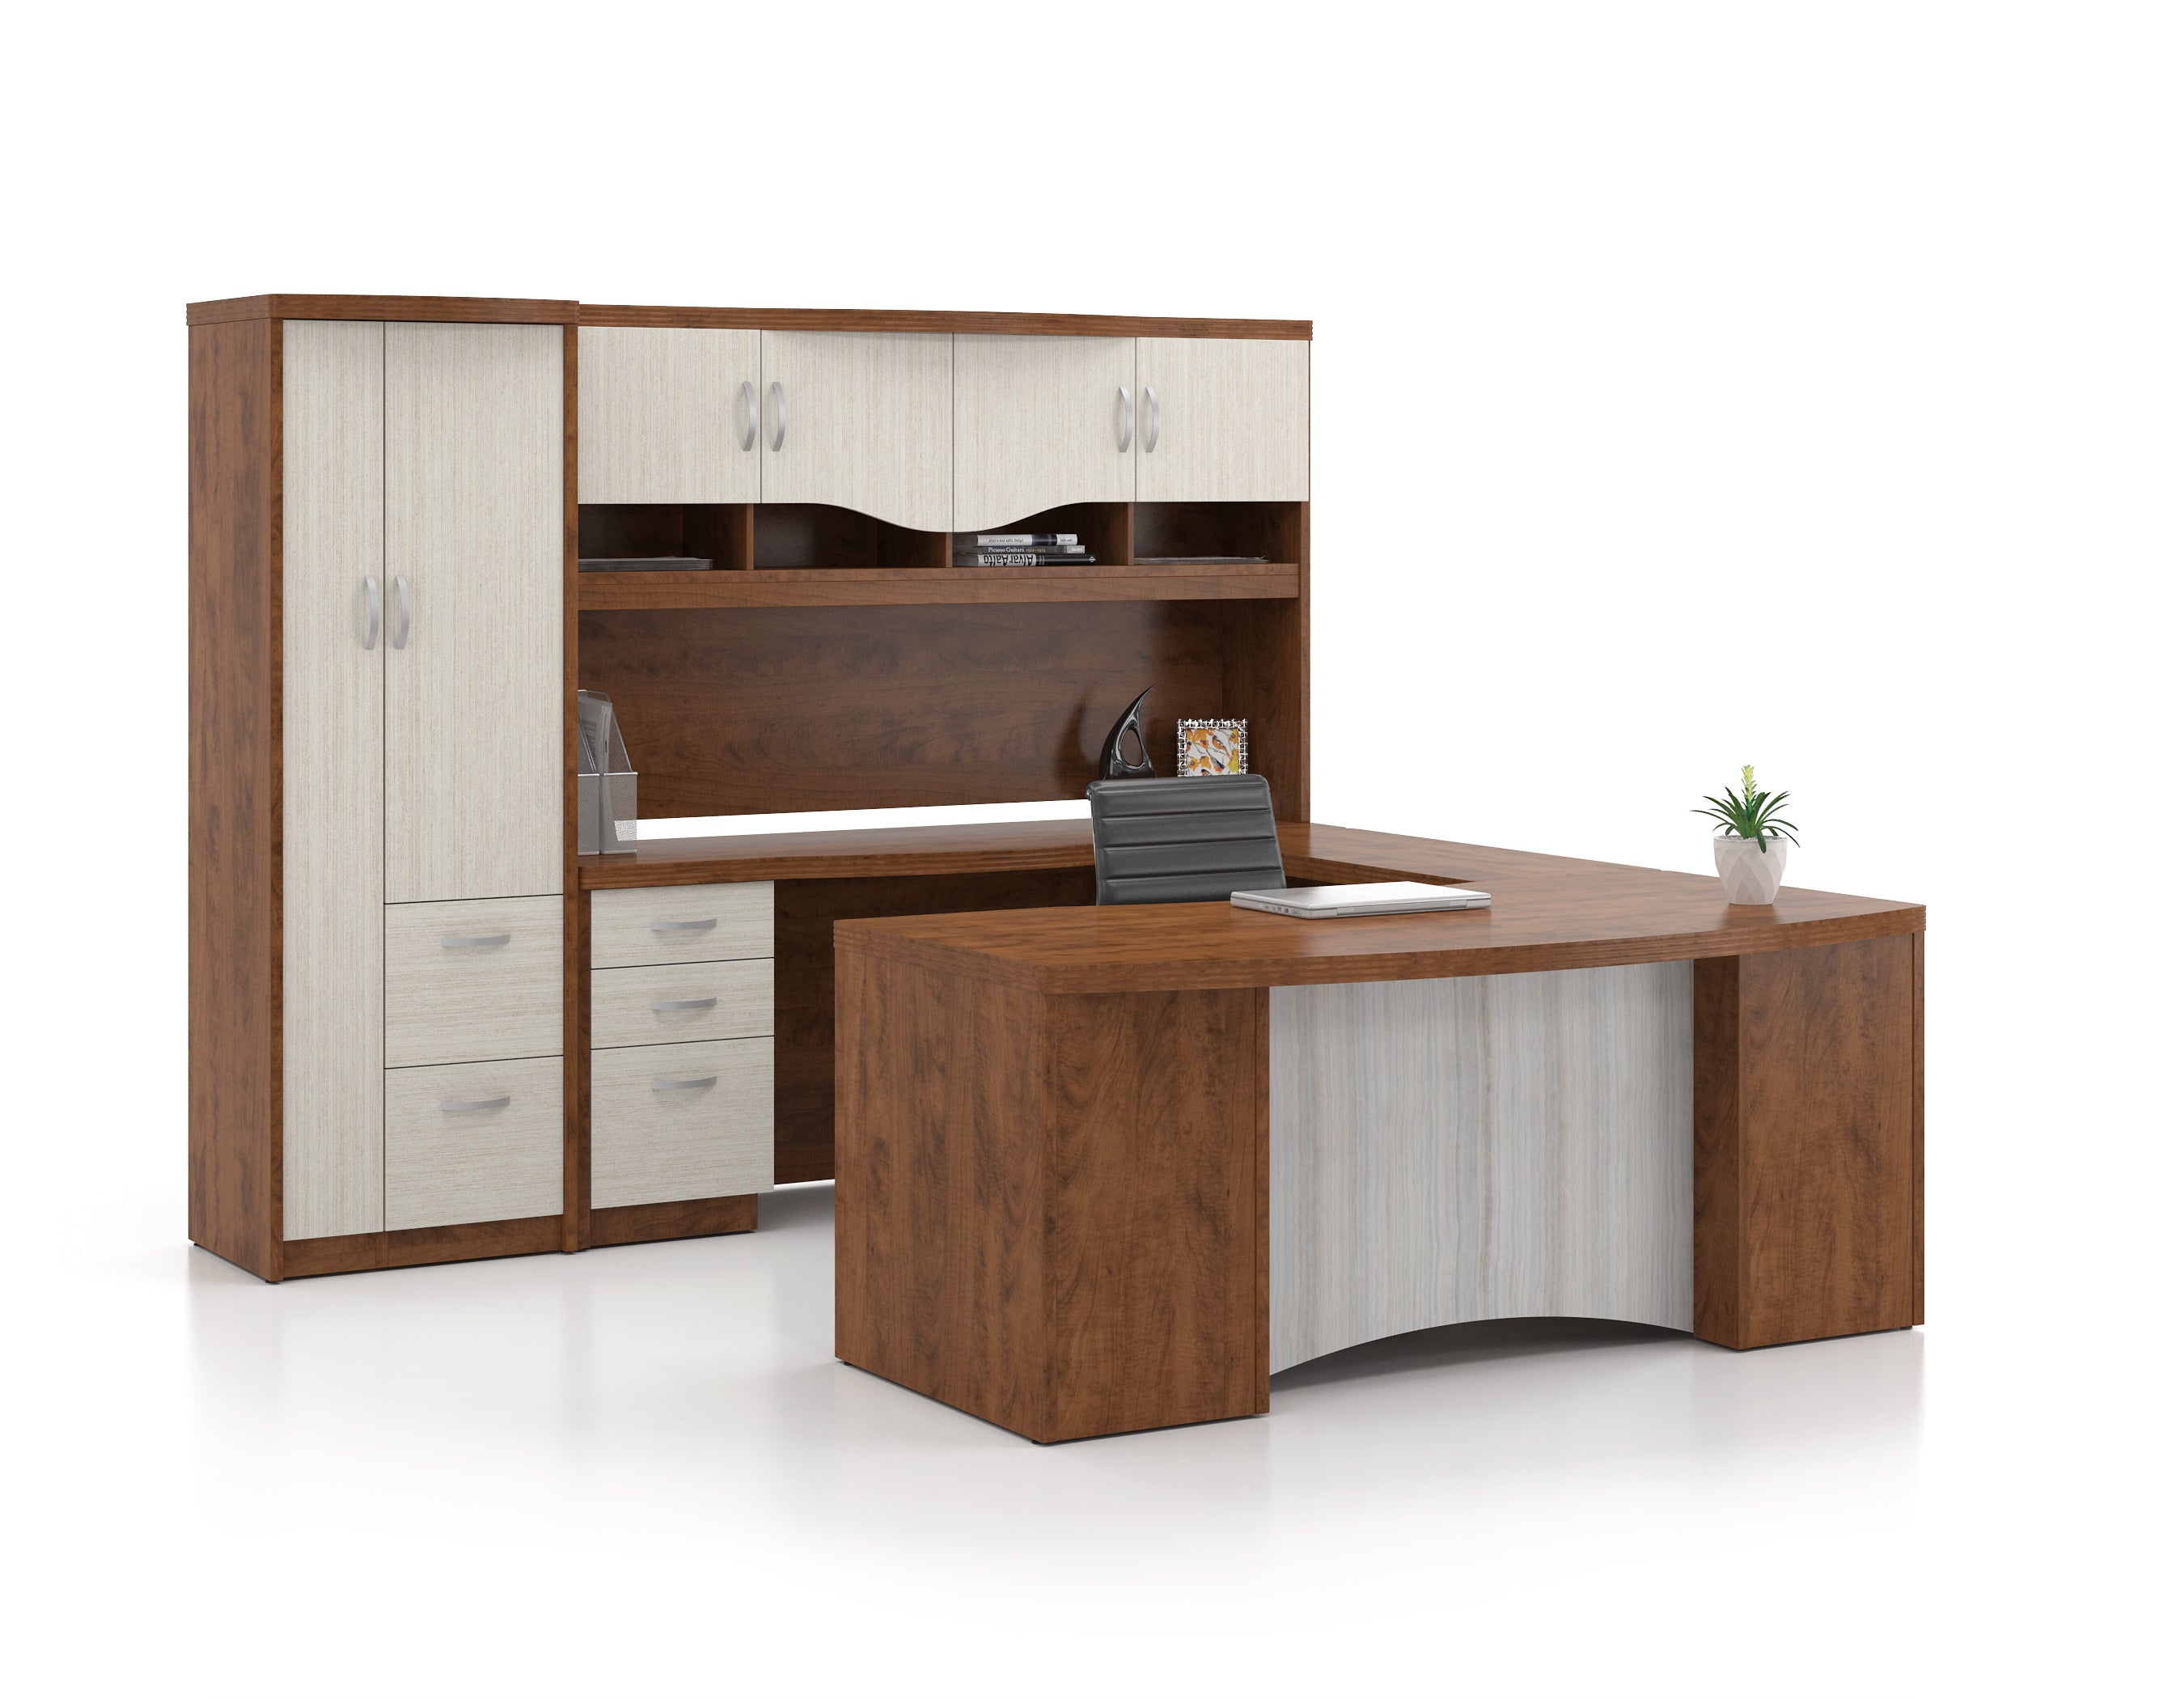 CAM239 - Deluxe Manhattan Series Office Suite / Executive Office Furniture by Candex